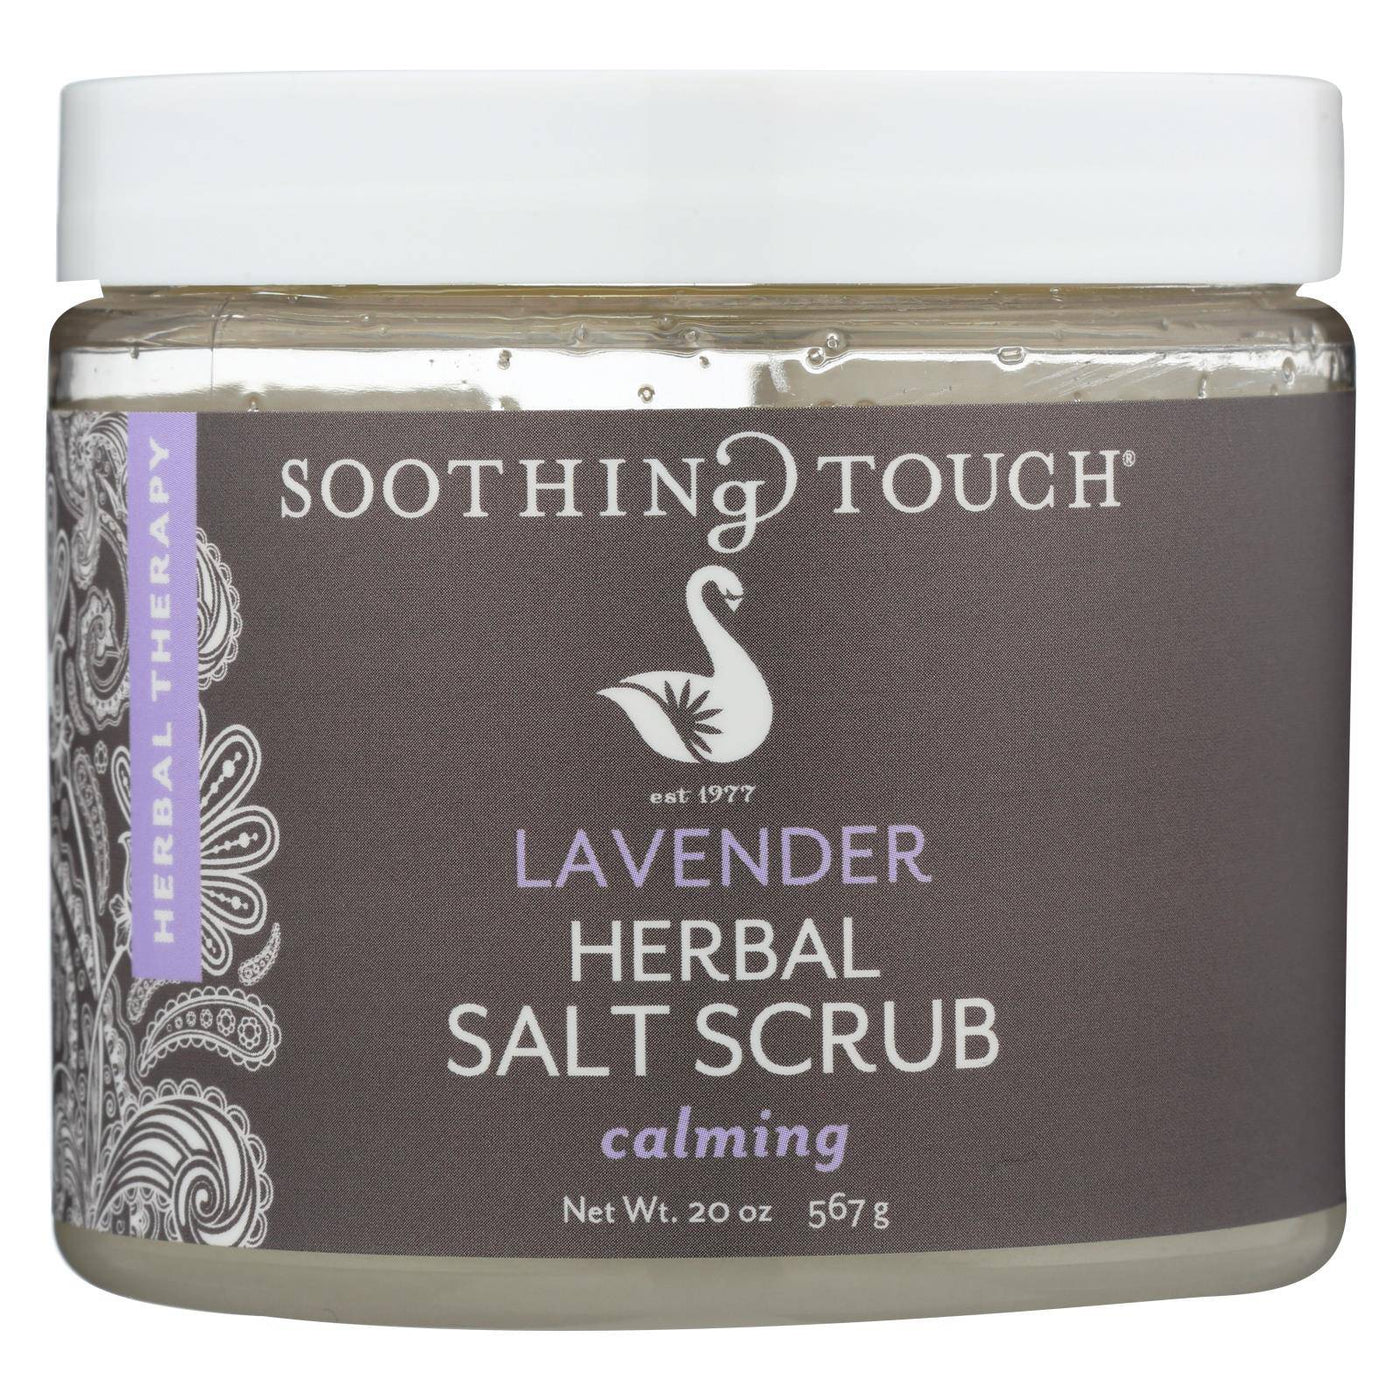 Soothing Touch Salt Scrub - Lavender - 20 Oz | OnlyNaturals.us